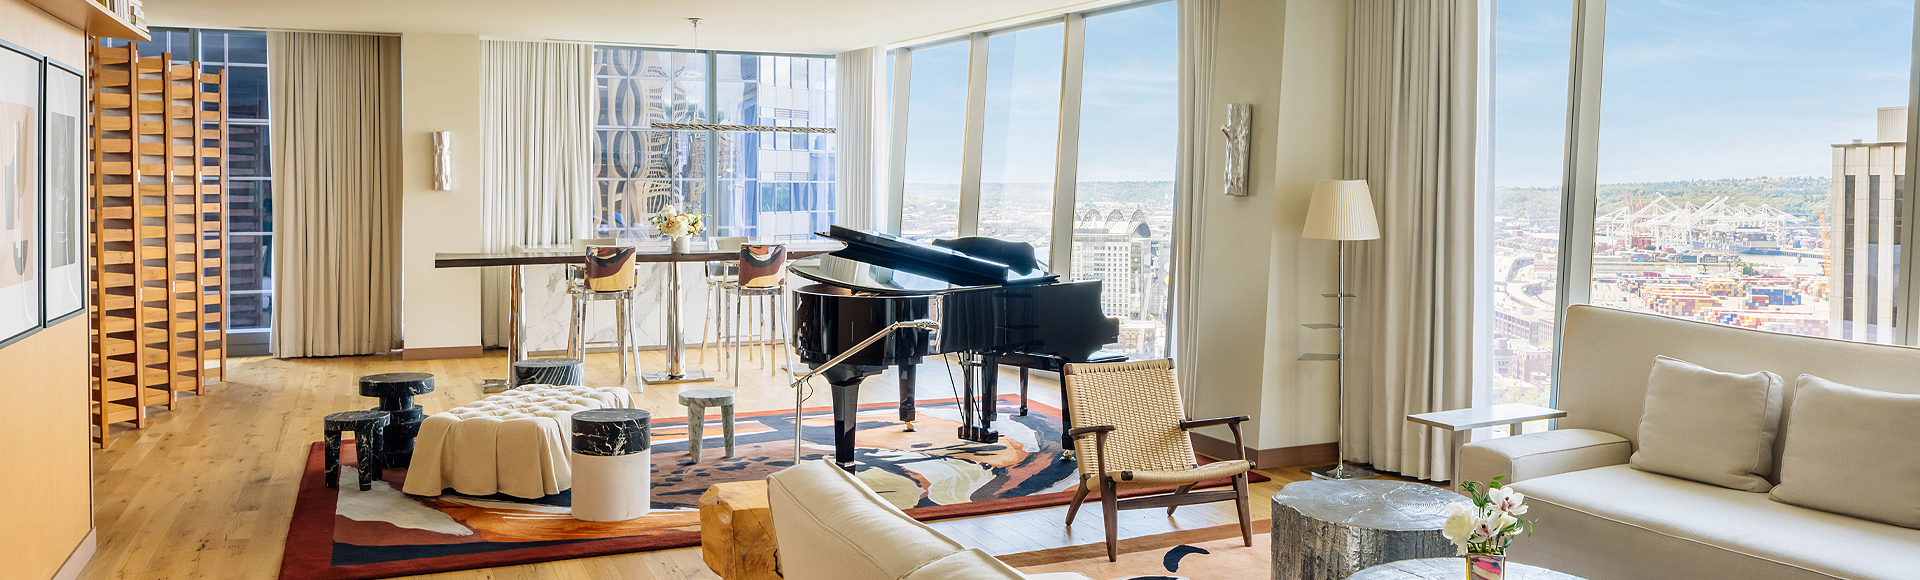 presidential suite living area with grand piano in the center and floor to ceiling windows overlooking the city